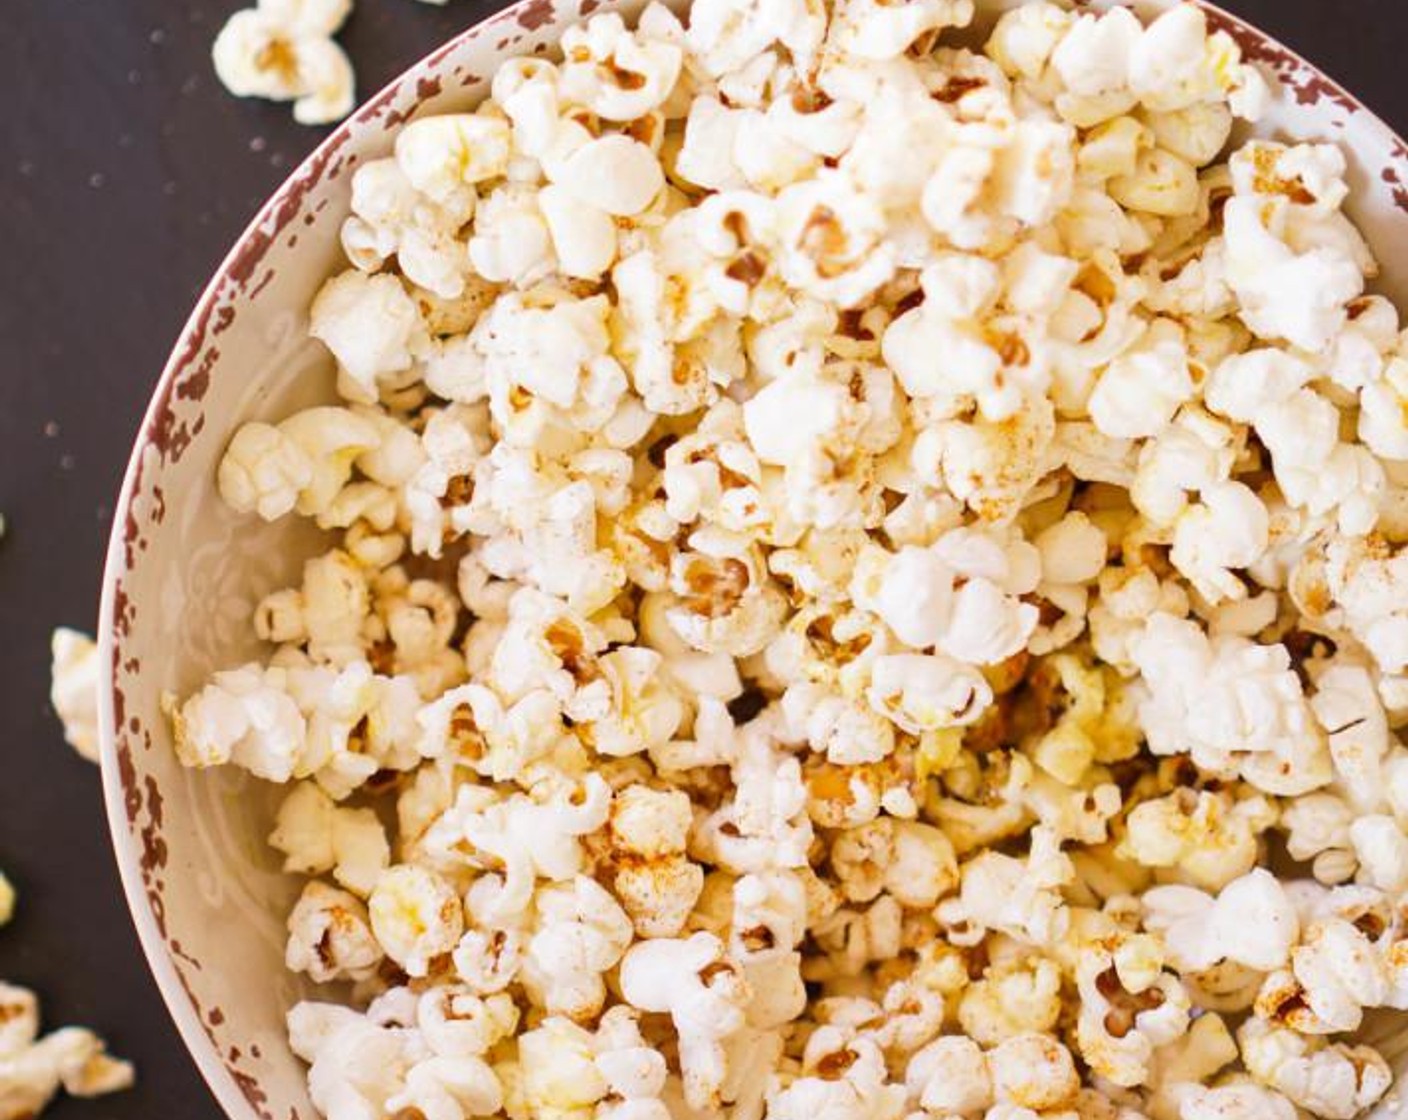 step 3 Transfer half of the popcorn to a bowl, season with Old Bay® Seasoning (to taste) and Garlic Salt (to taste) as desired, then repeat with the remaining popcorn. Sprinkle the bowl evenly with Parmesan Cheese (1 Tbsp) as desired.